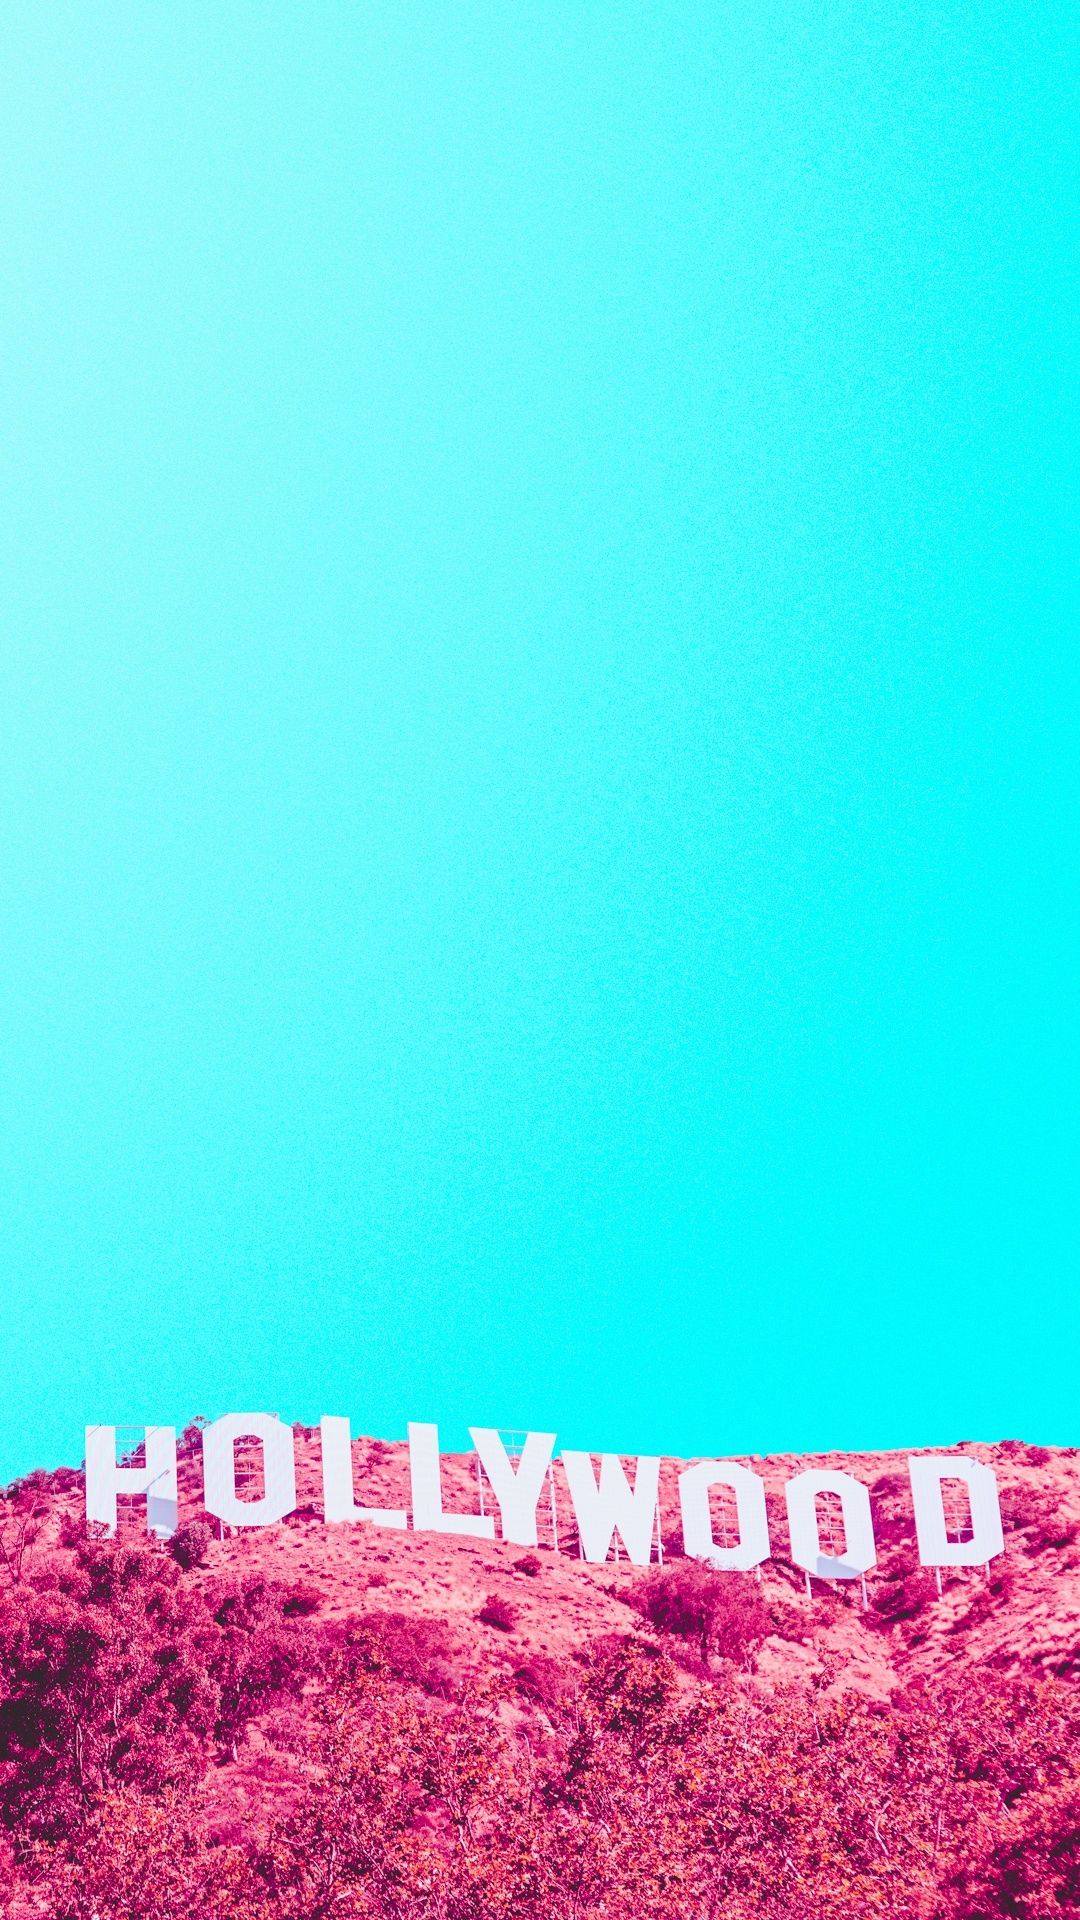 Hollywood Hills Sign Infrared iPhone 6 Plus HD Wallpaper. Phone wallpaper, Turquoise wallpaper, iPhone wallpaper